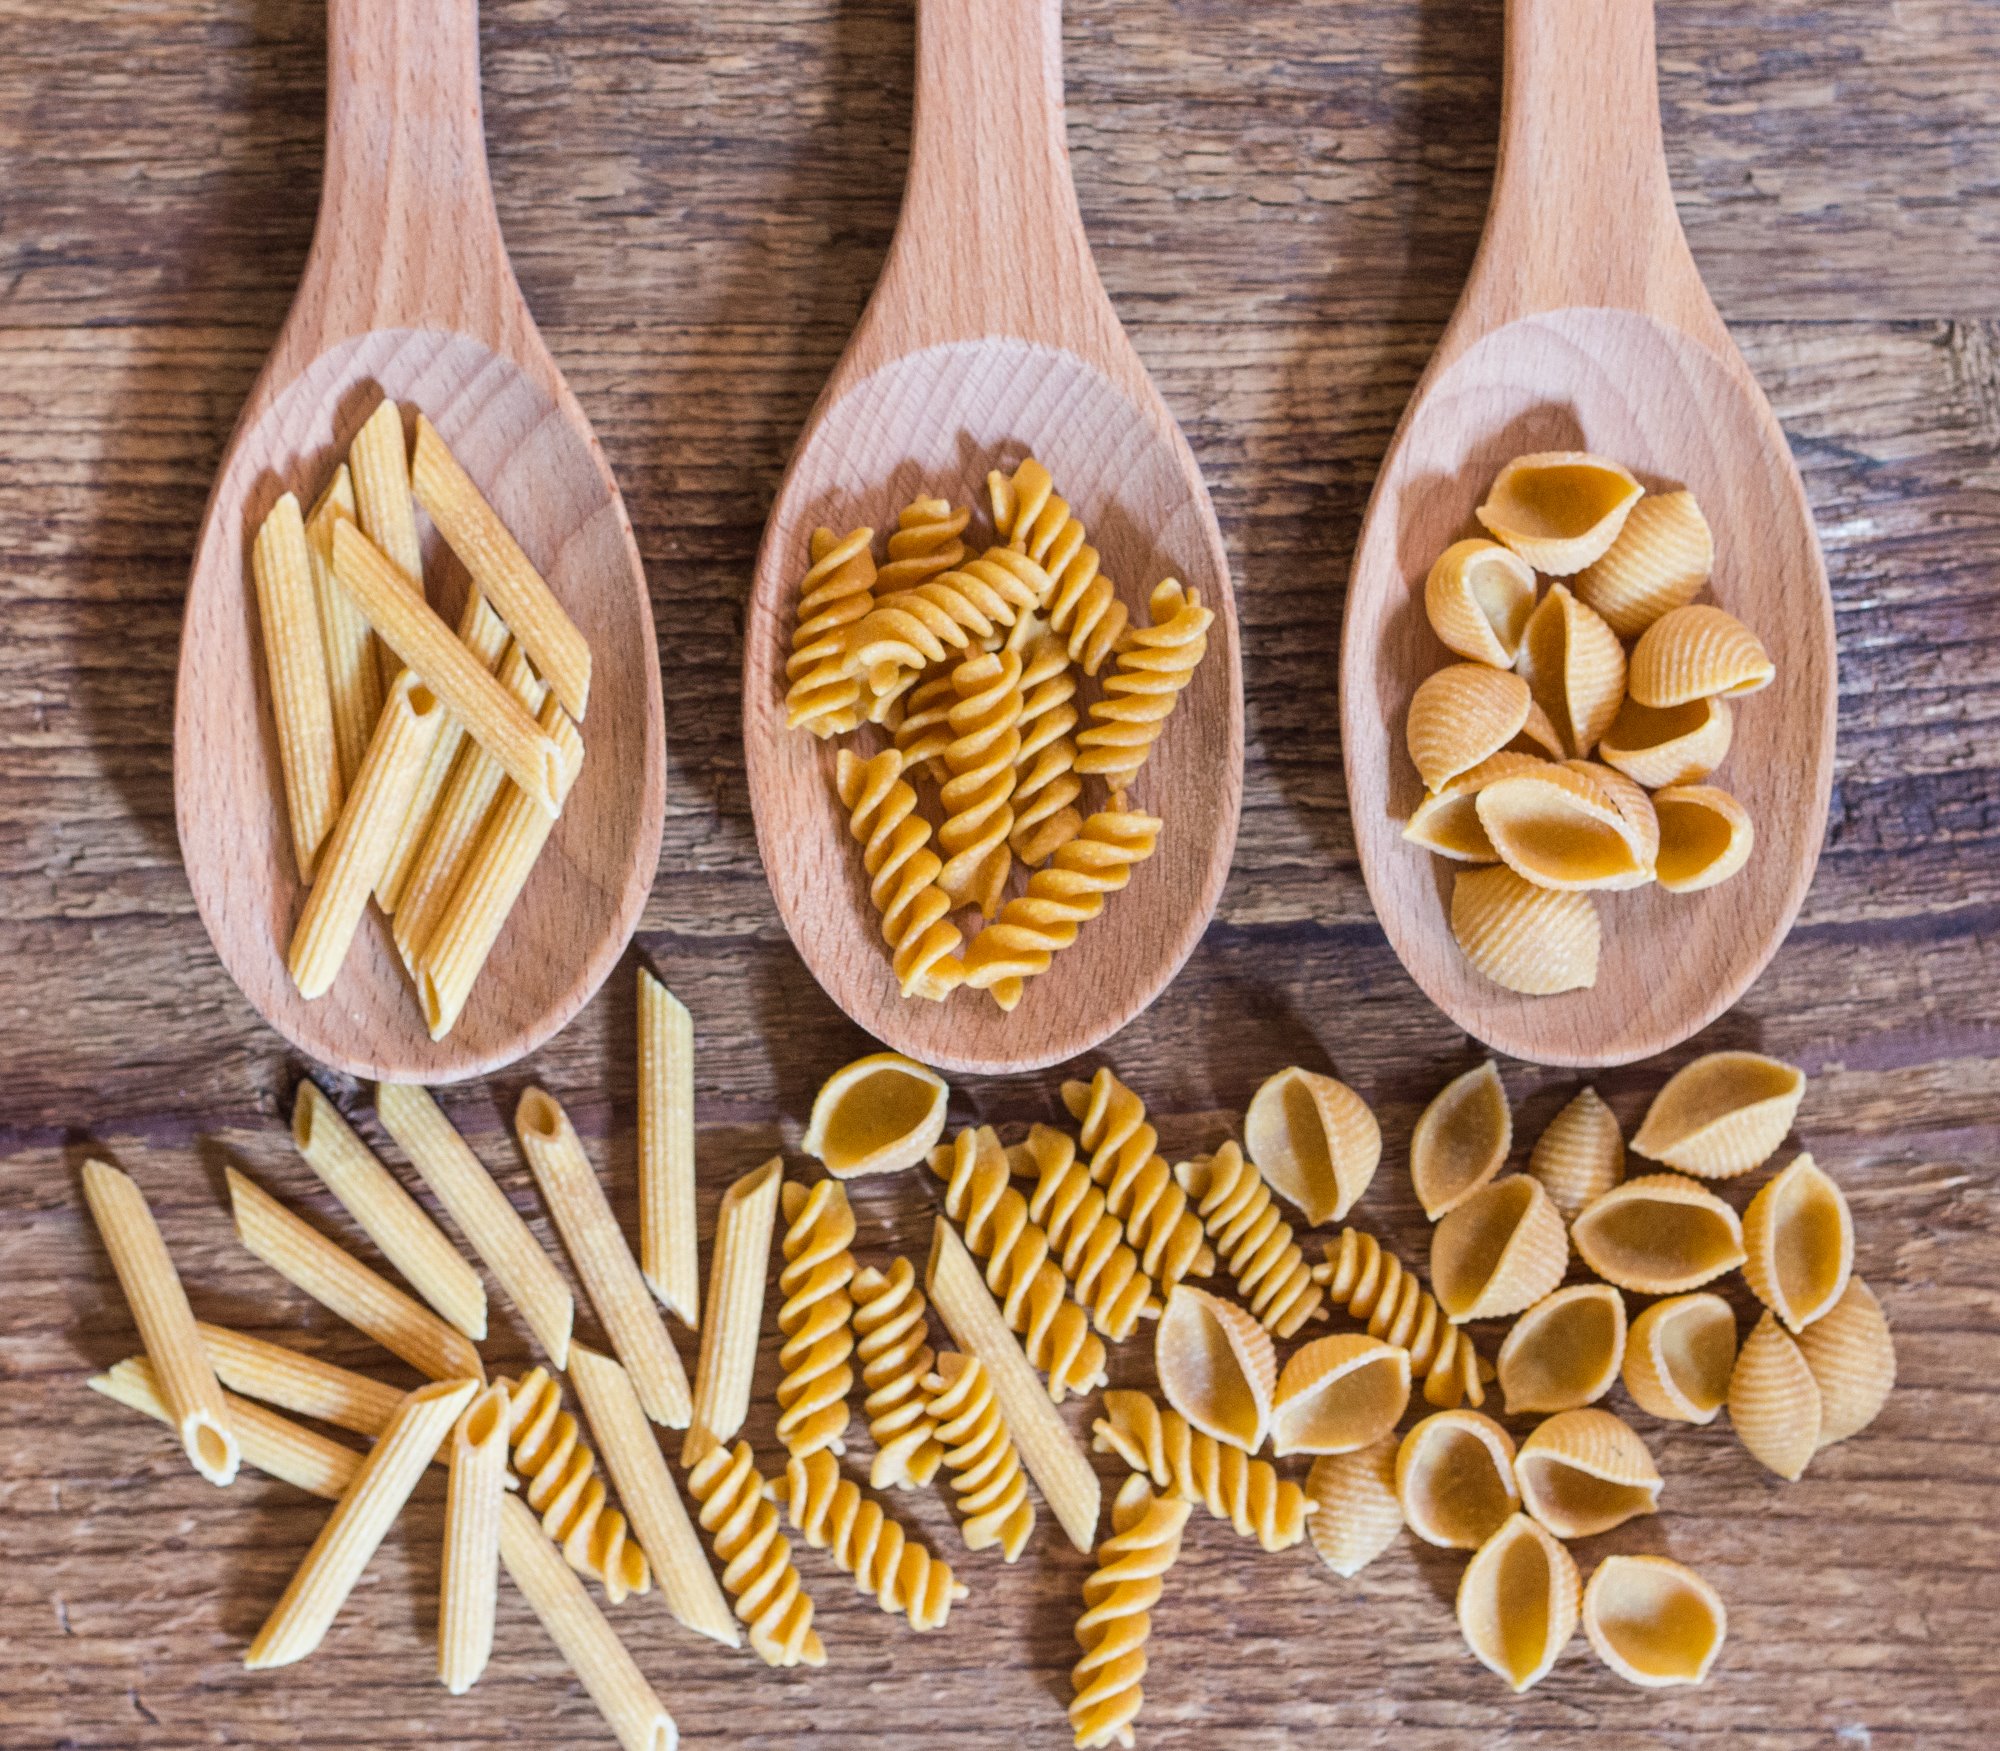 dried pasta in different shapes on wooden spoons